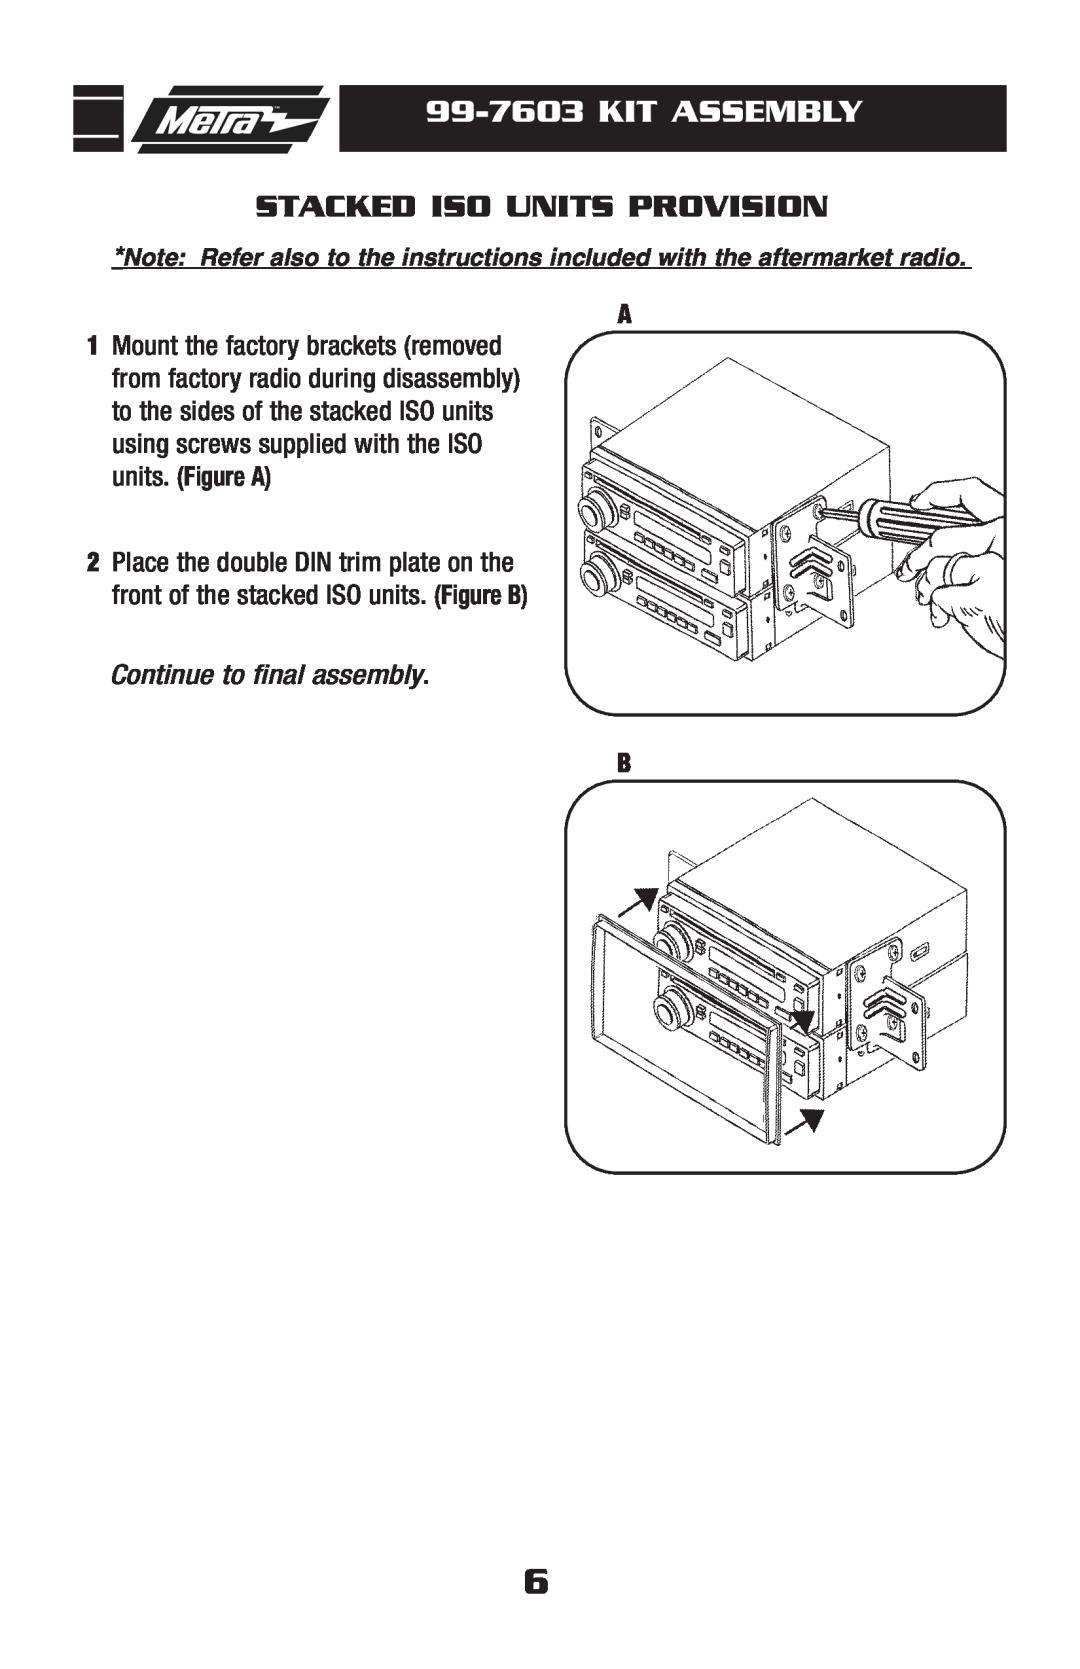 Metra Electronics 99-7603 installation instructions Stacked Iso Units Provision, Kit Assembly, Continue to final assembly 